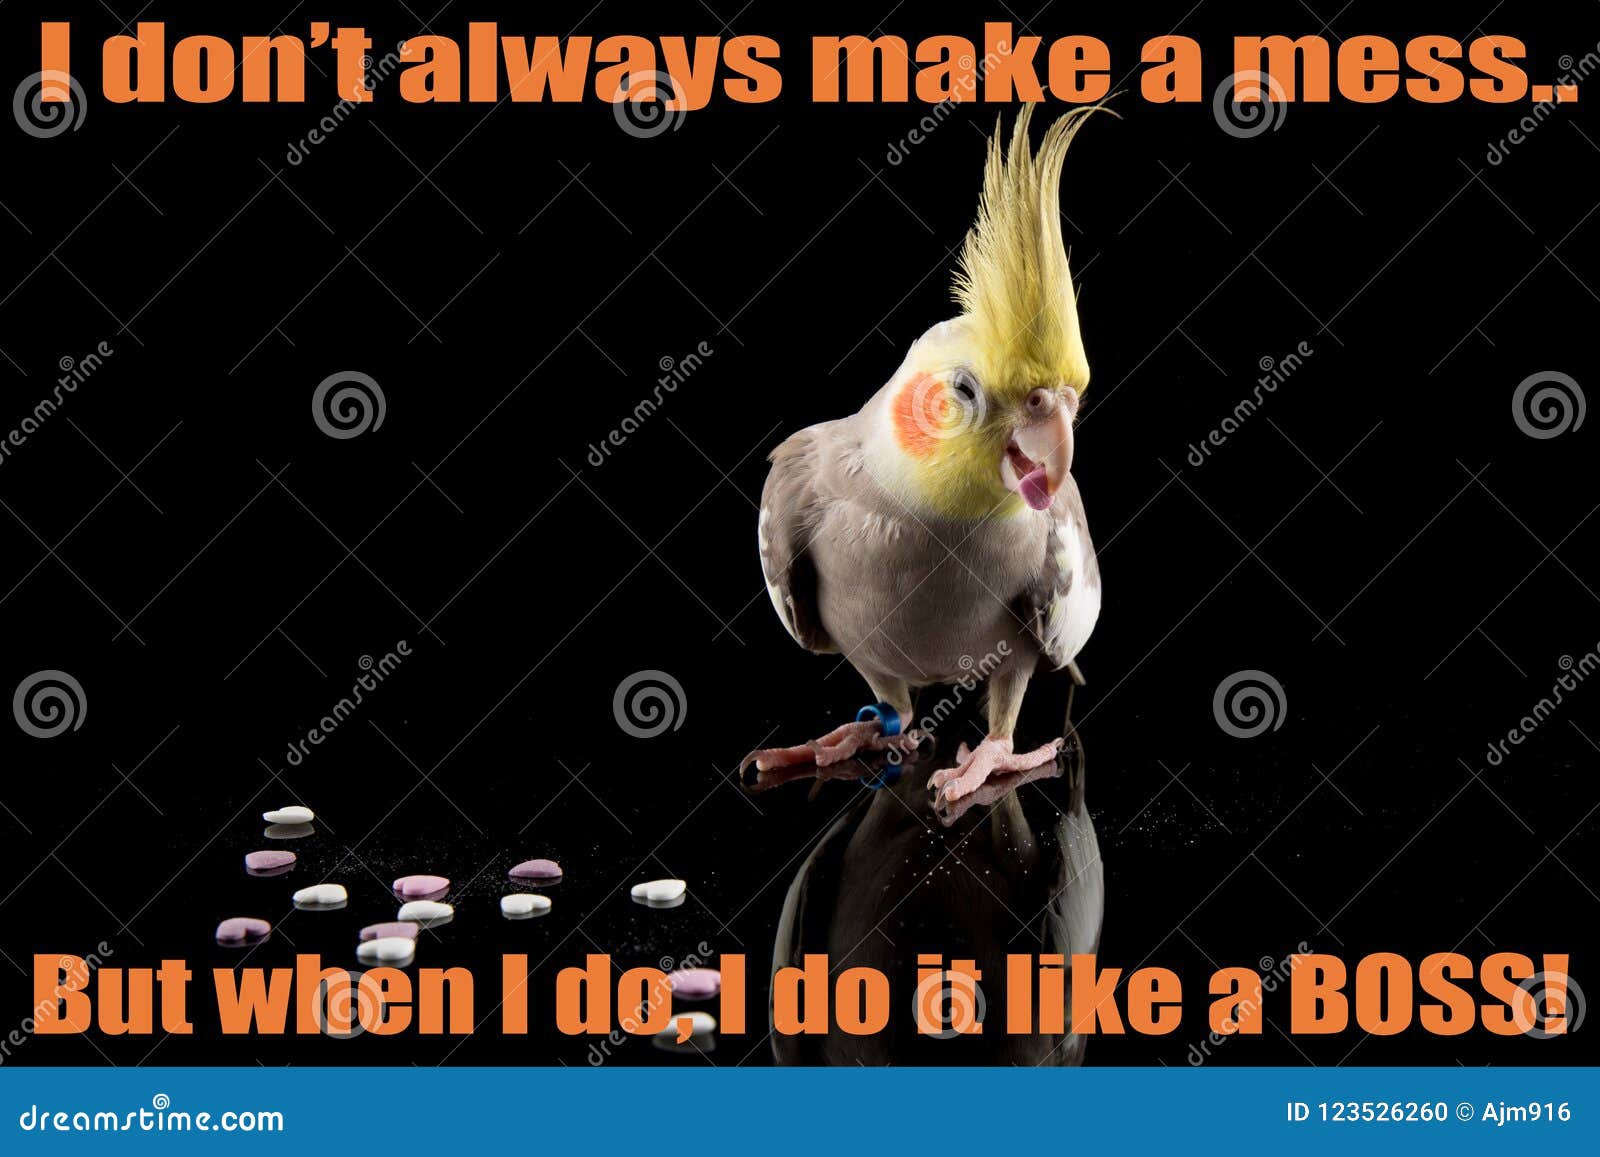 Funny Cockatiel Quote, Cute Parrot Meme, Eating Small Hearts ...